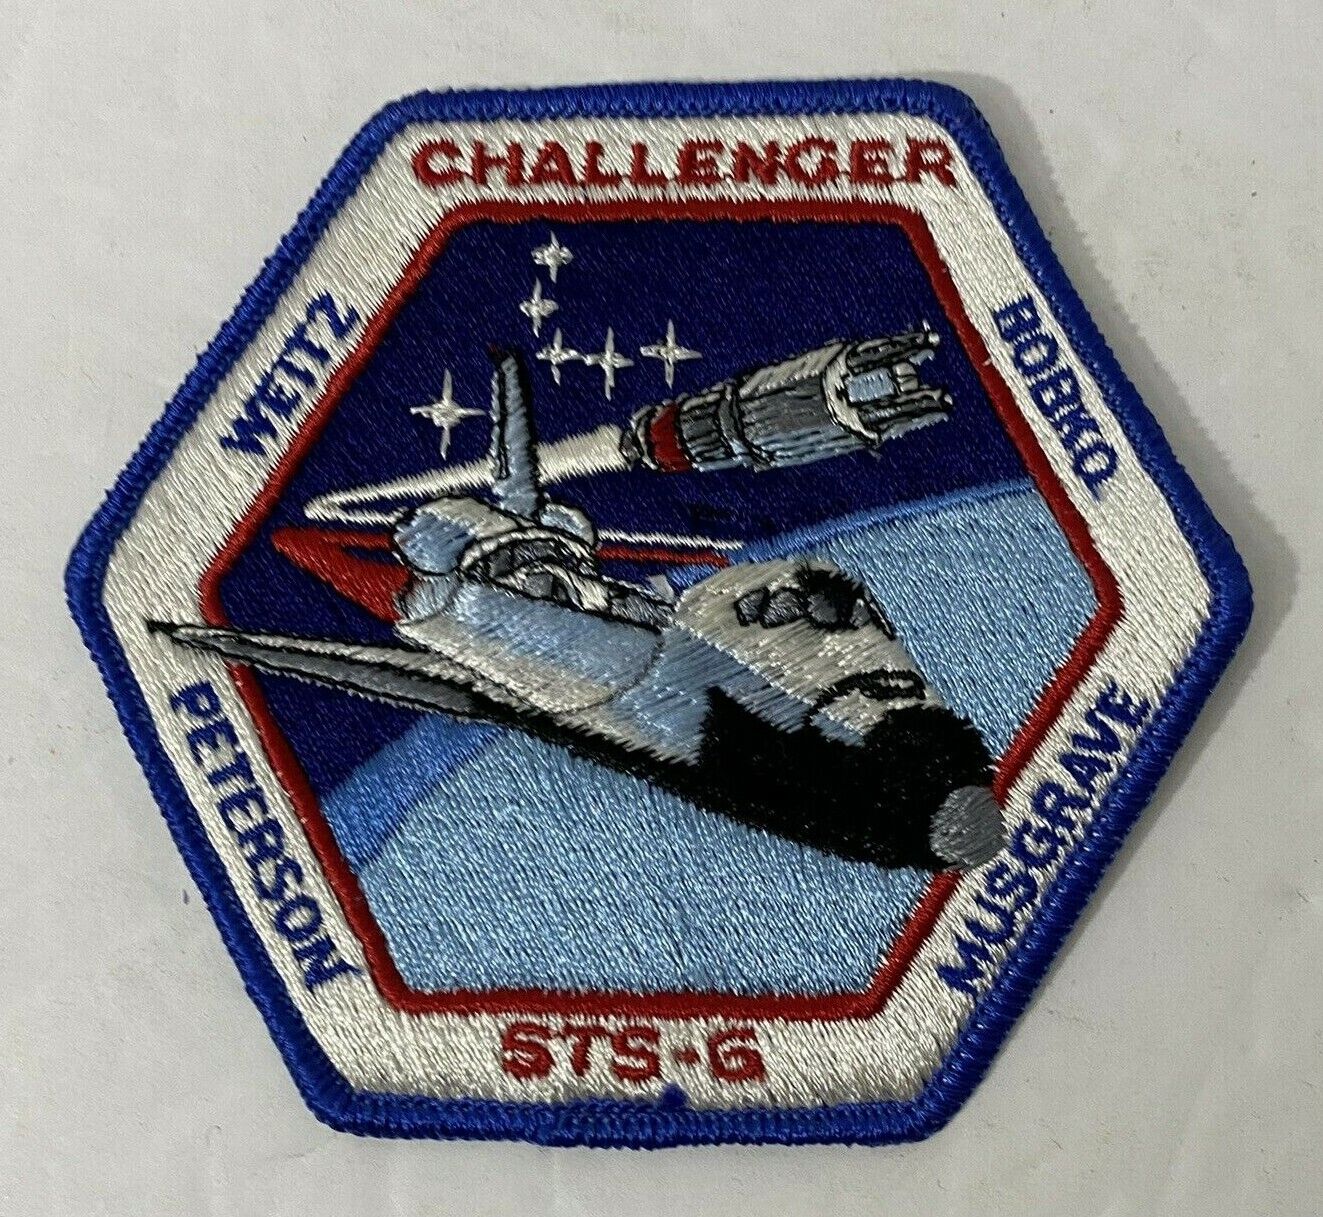 STS-6 SPACE SHUTTLE CHALLENGER CREW MISSION PATCH w/ WEITZ MUSGRAVE BOBKO PETERS